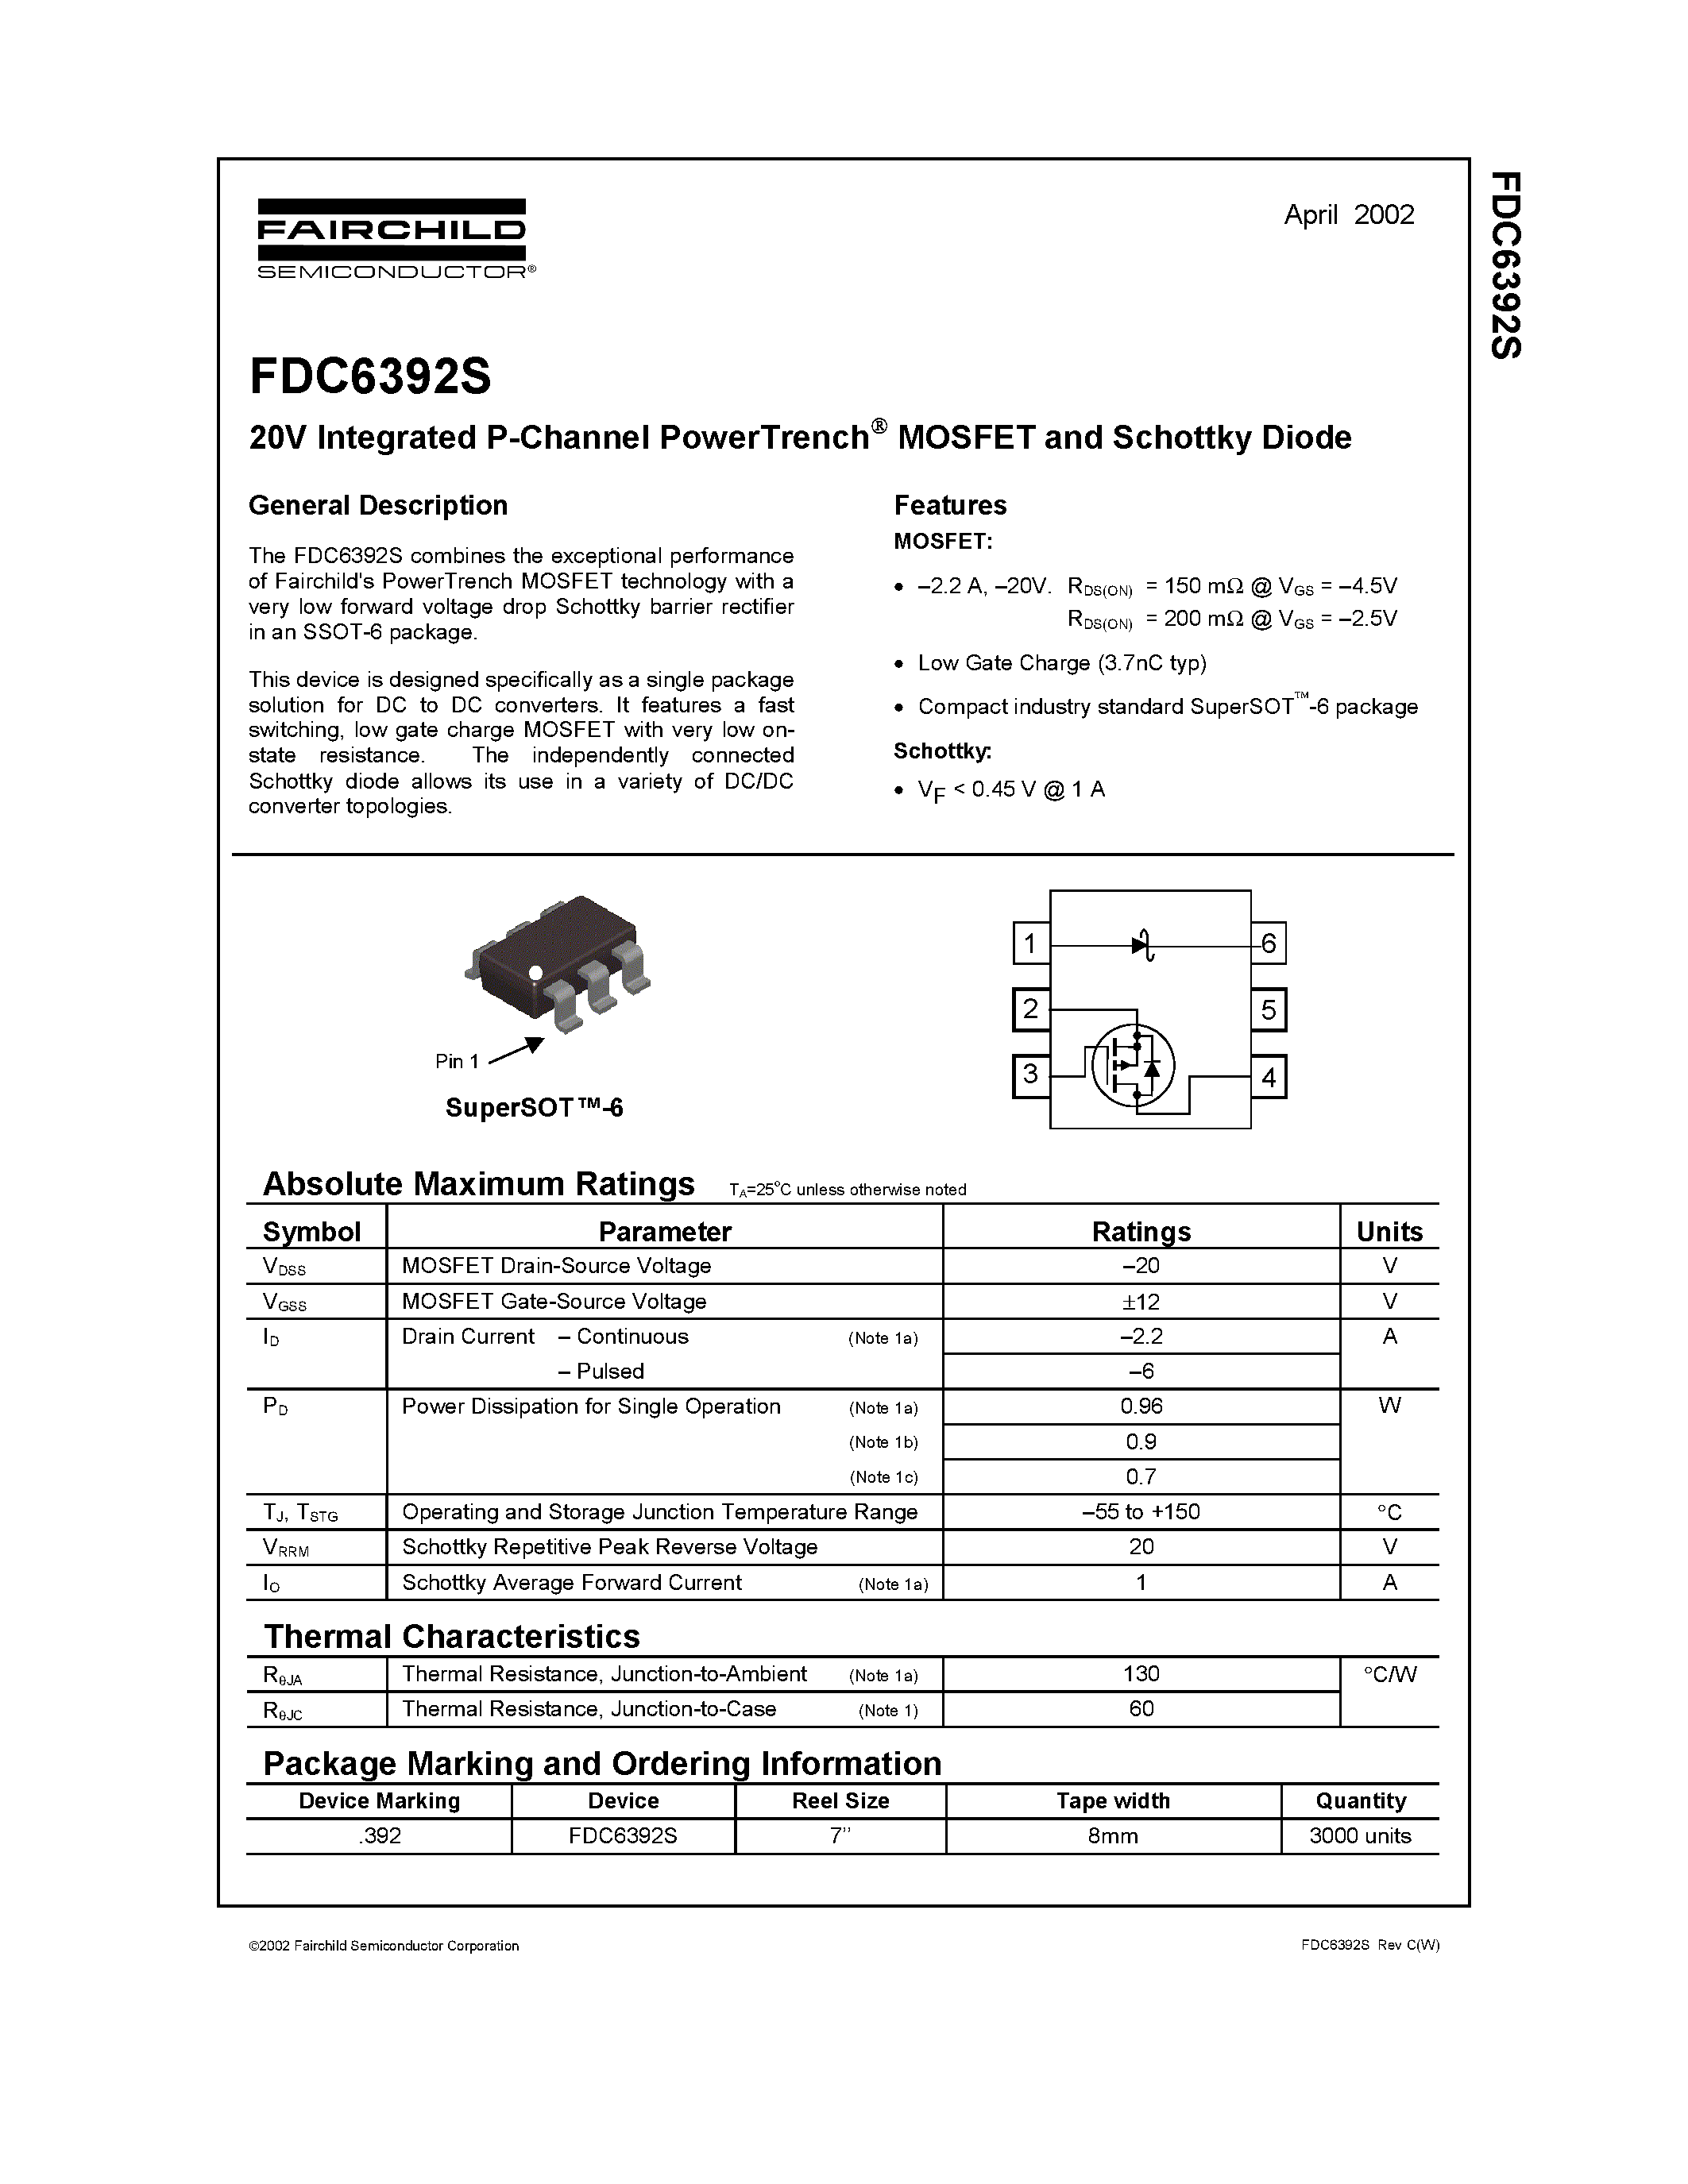 Datasheet FDC6392S - 20V Integrated P-Channel PowerTrench MOSFET and Schottky Diode page 1